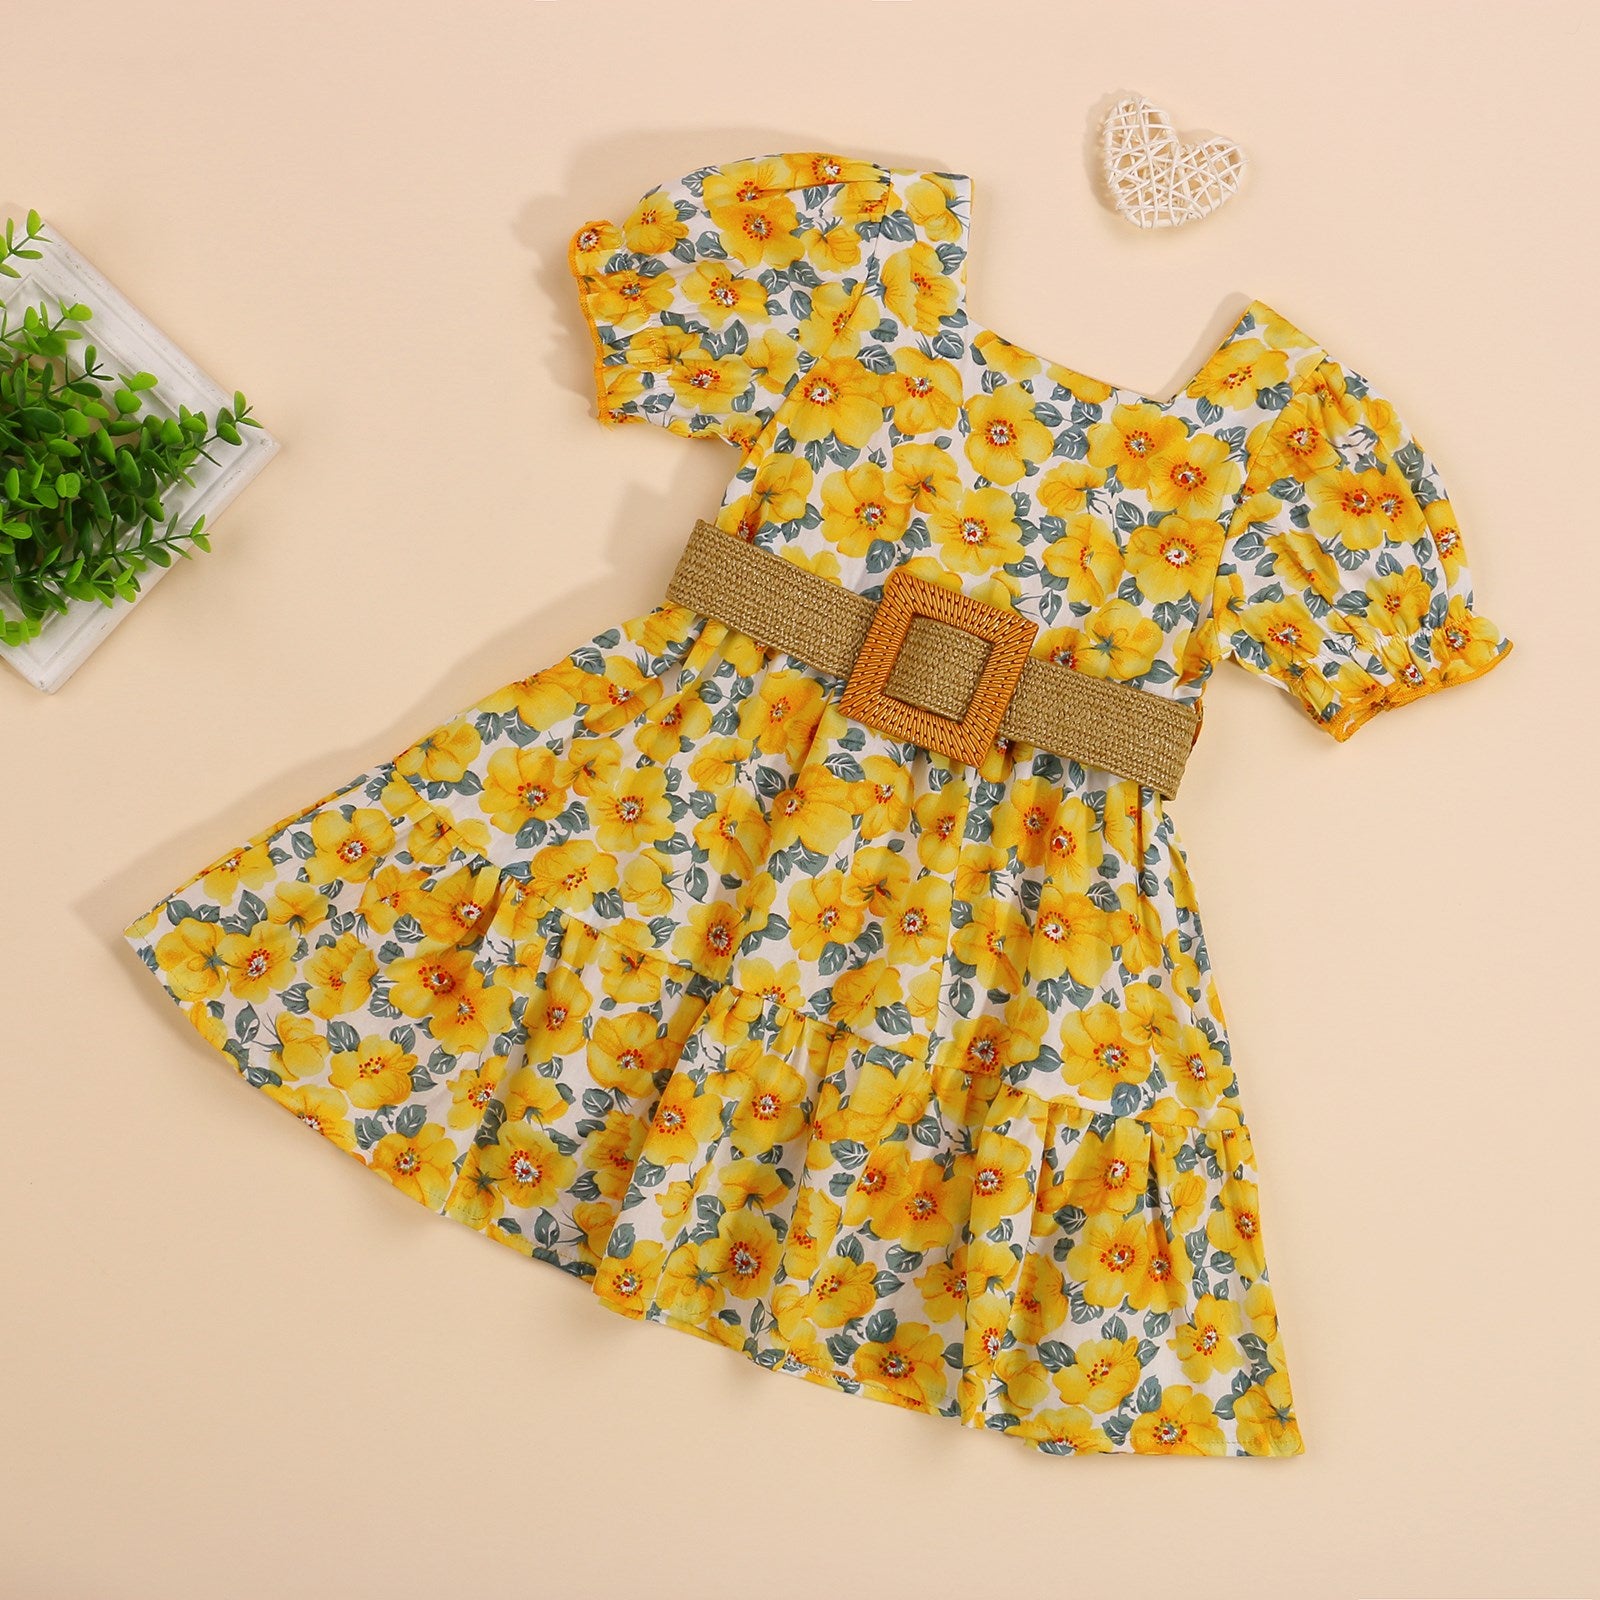 Baby Dress - Girls' Clothes for Infants and Kids